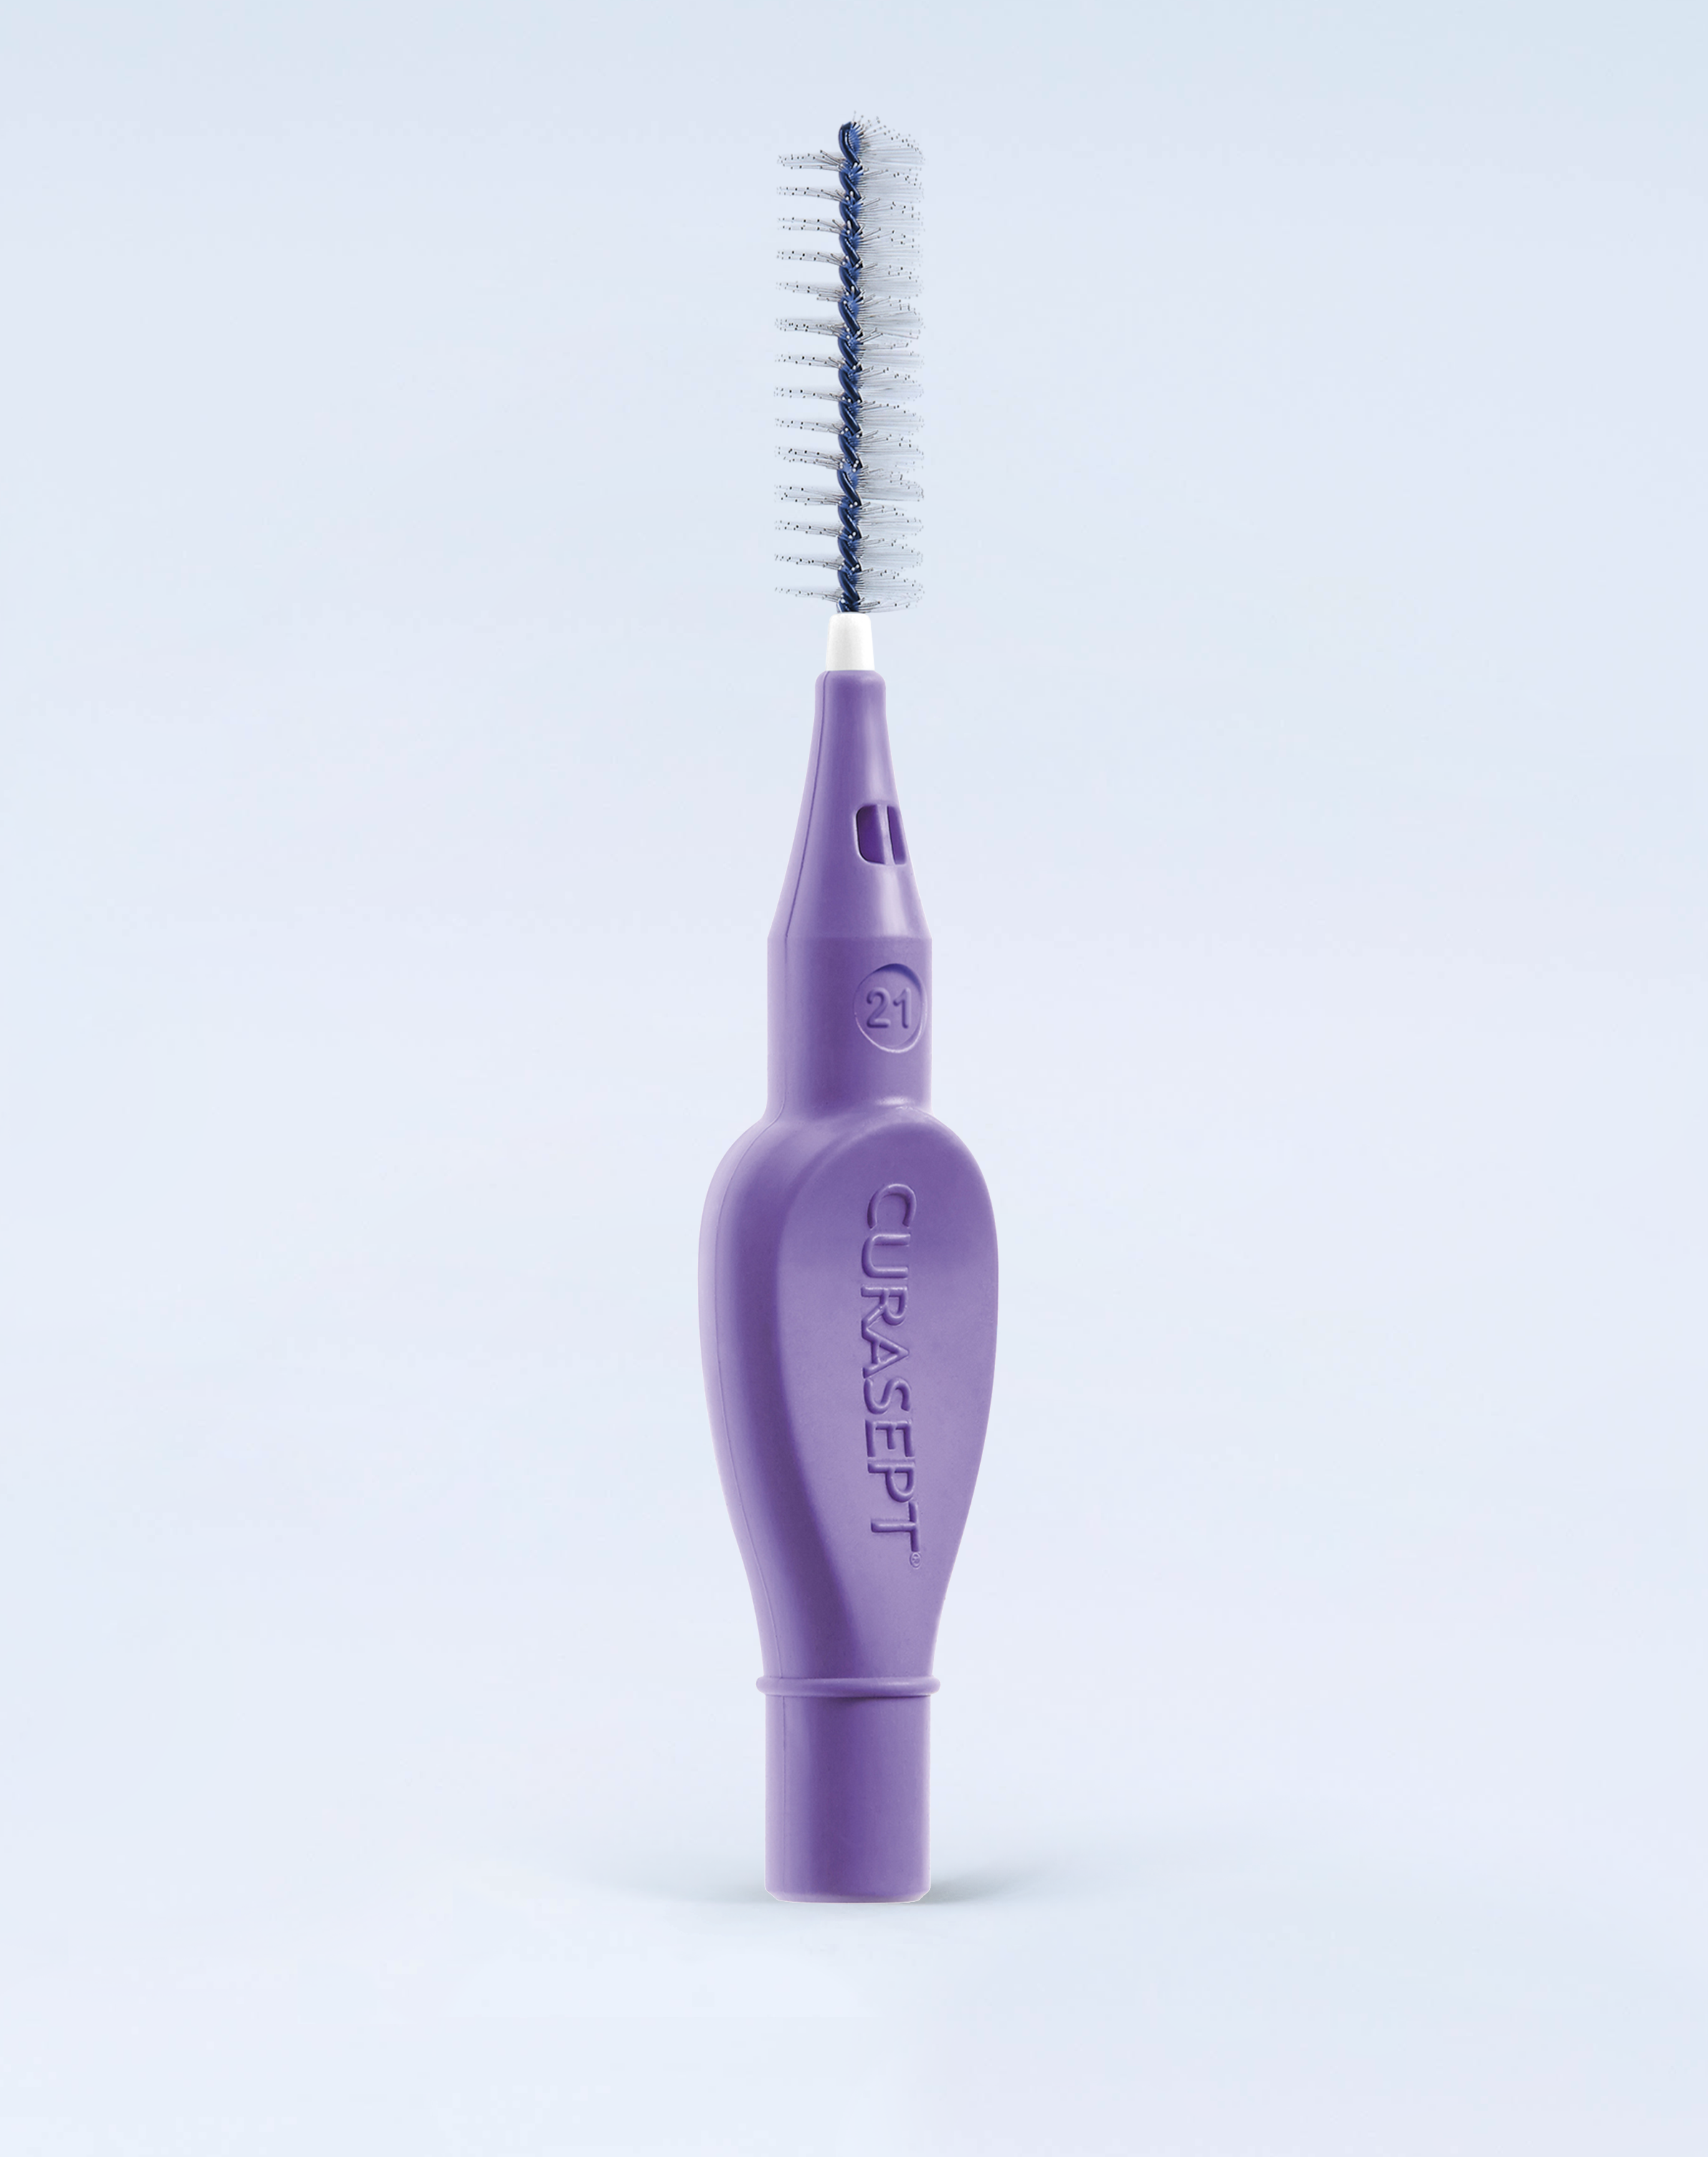 [BD] Curasept Scovolino Proxi Treatment T21 - 2,1 mm ISO 6